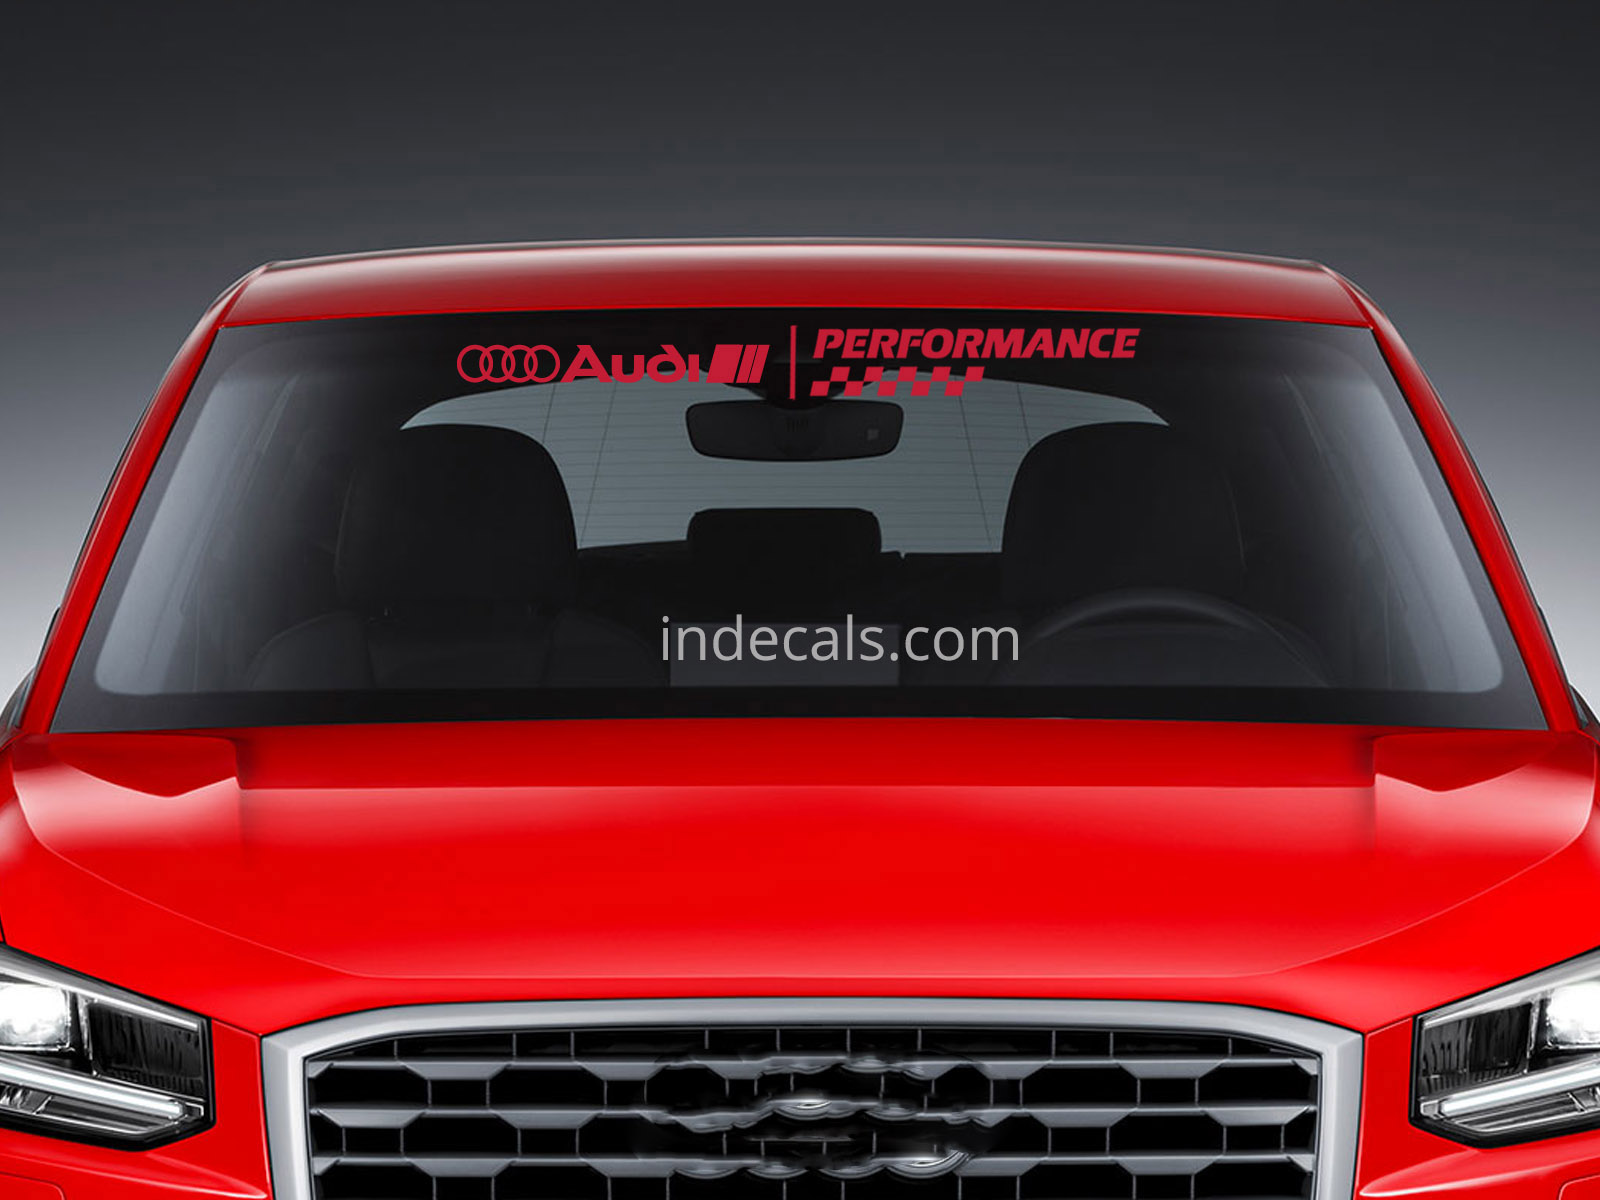 http://indecals.com/img/product/146-1-x-Audi-Performance-Sticker-for-Windshield-or-Back-Window--Red.jpg